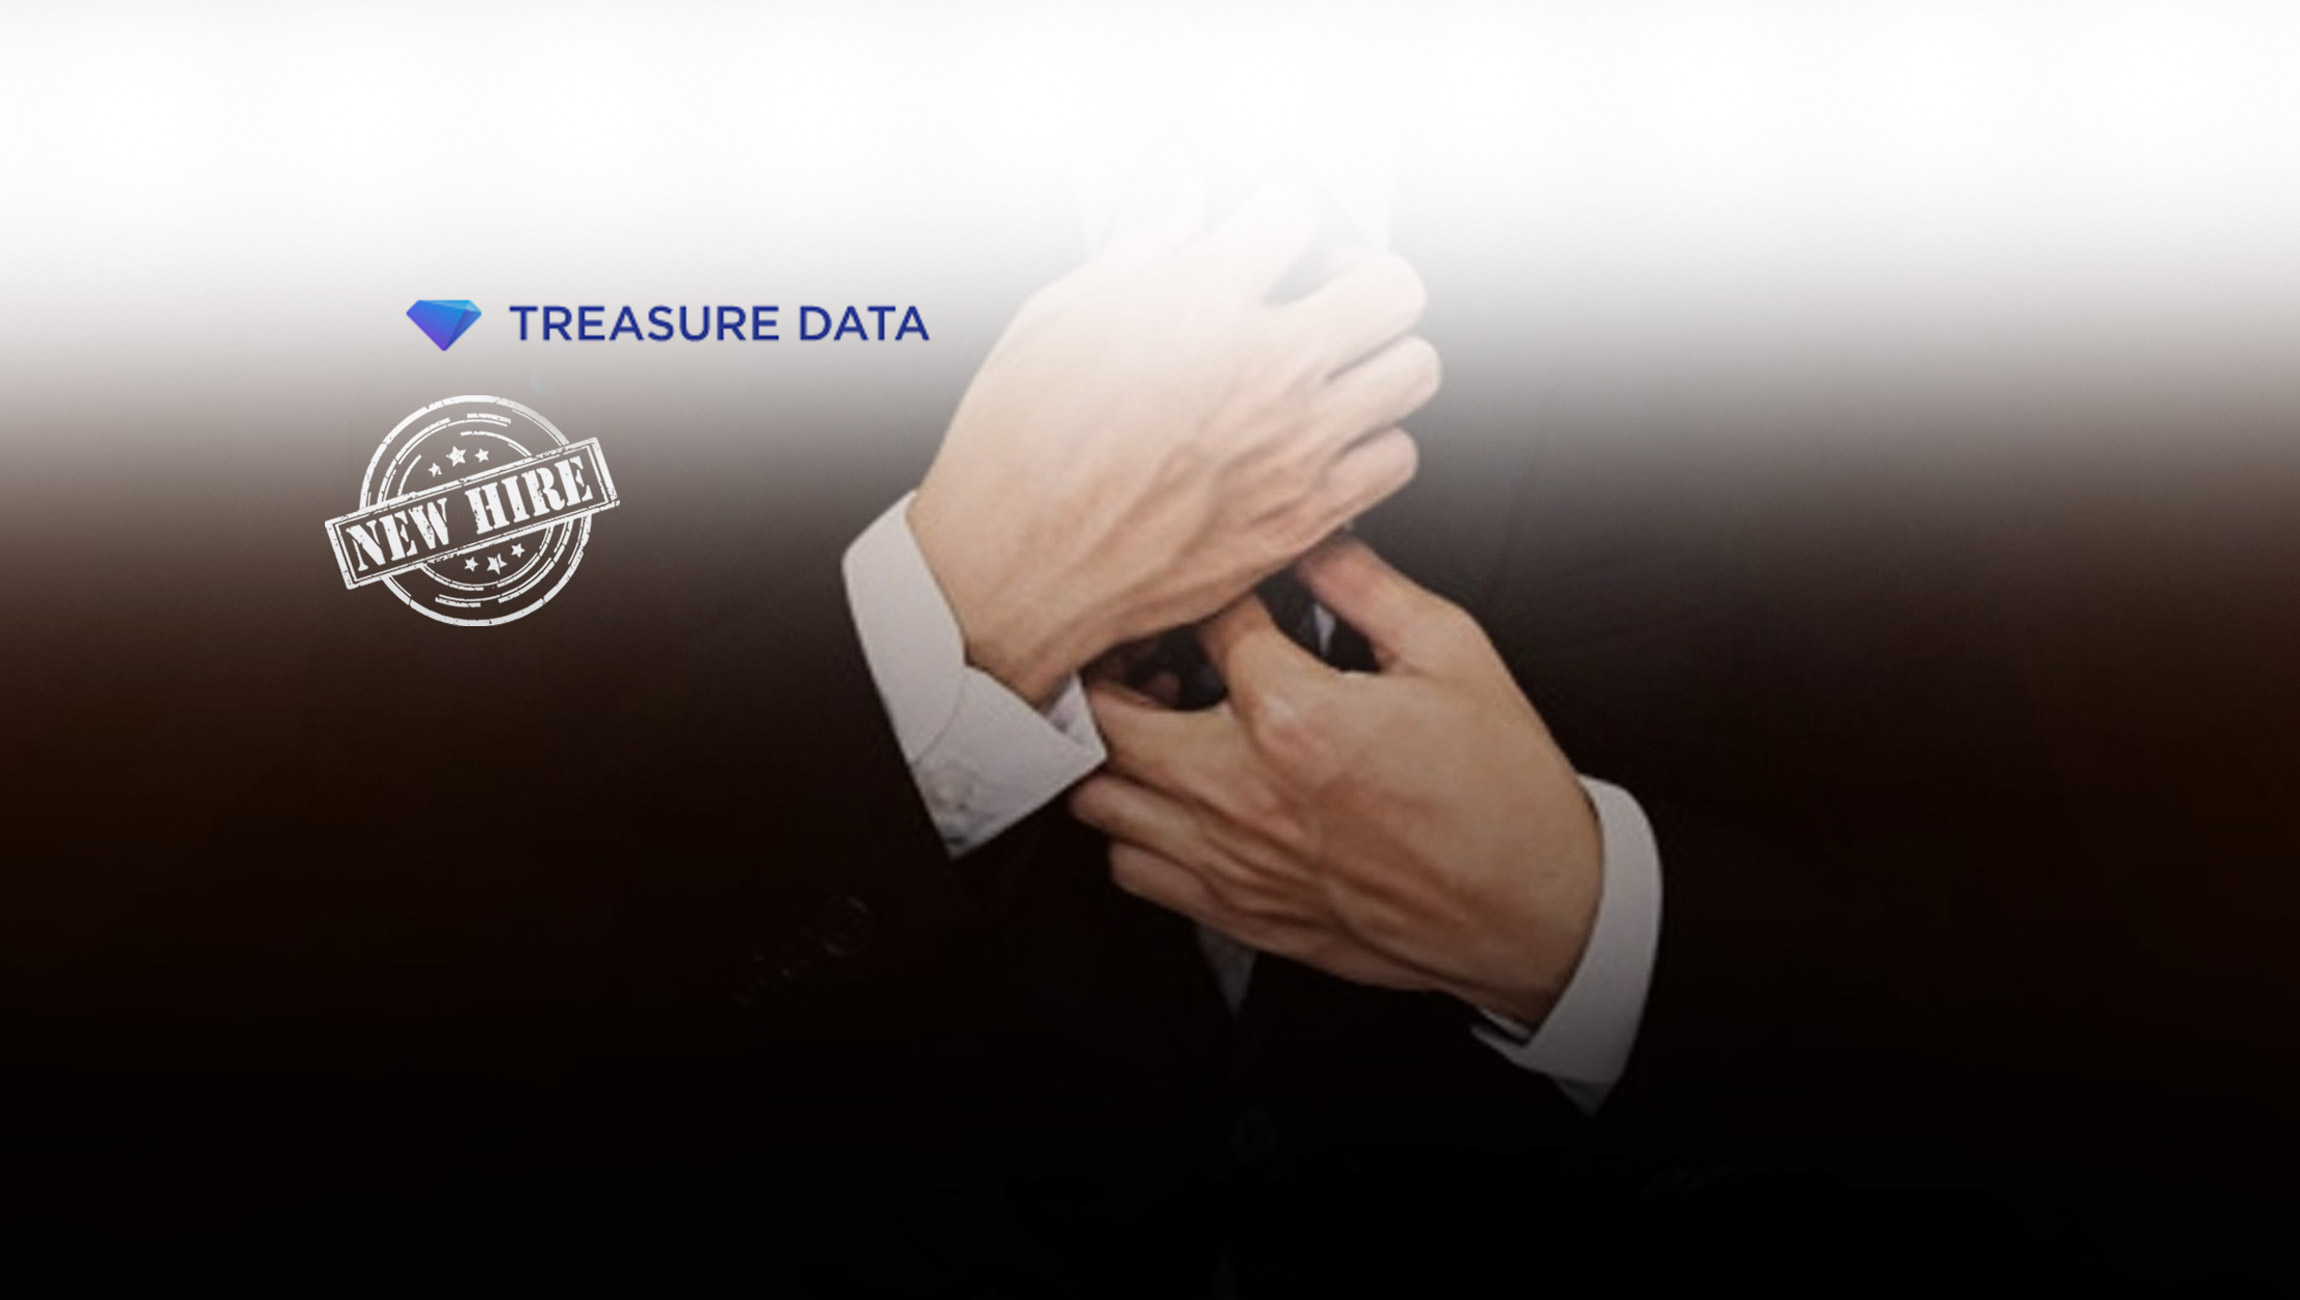 Treasure Data Appoints New Chief Executive Officer to Build on 3x Growth